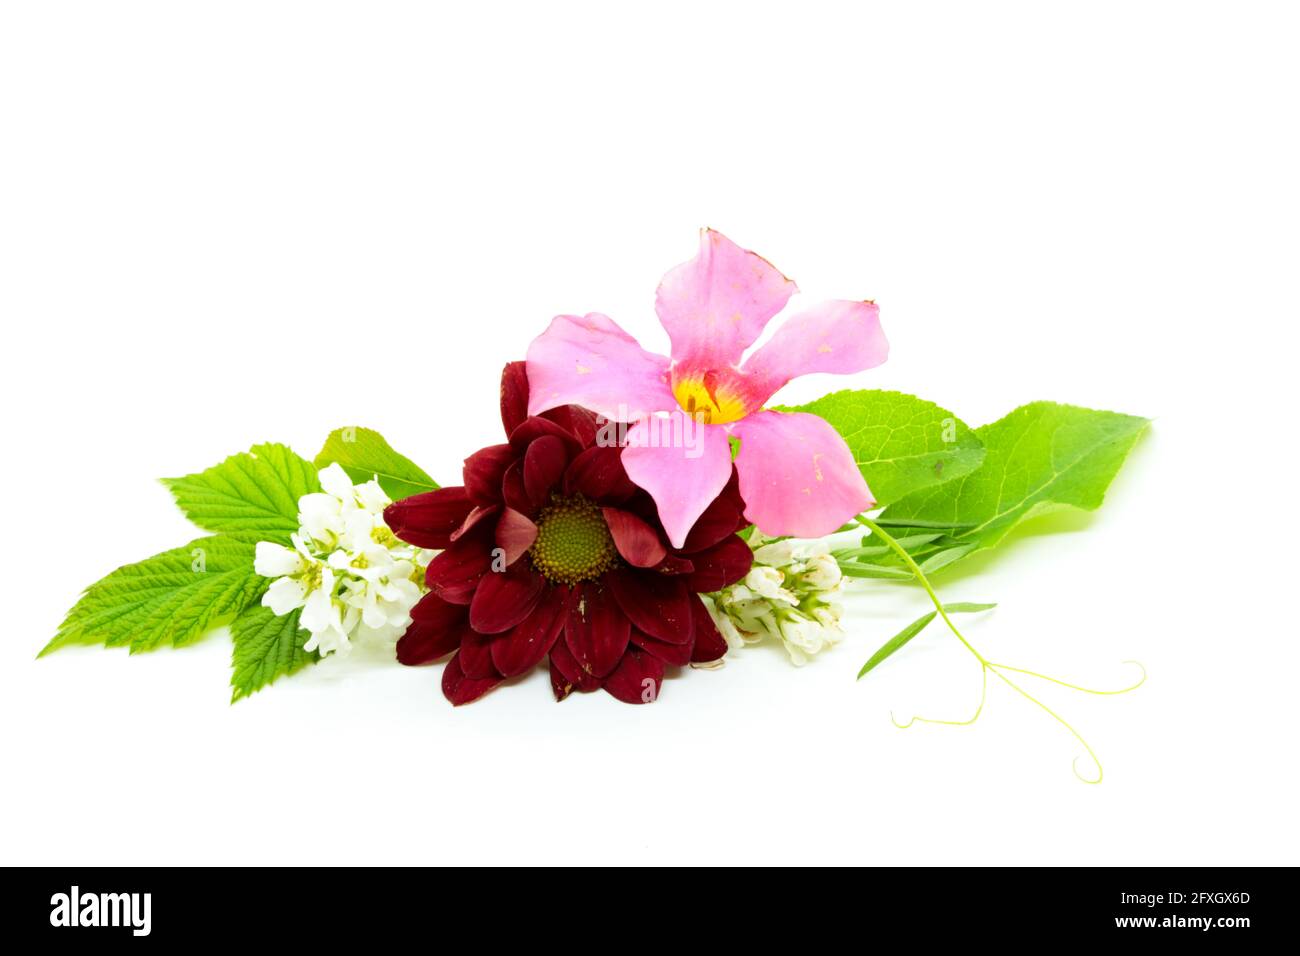 Flowers of chrysanthemum and bird cherry with a pink creeper flower on white Stock Photo